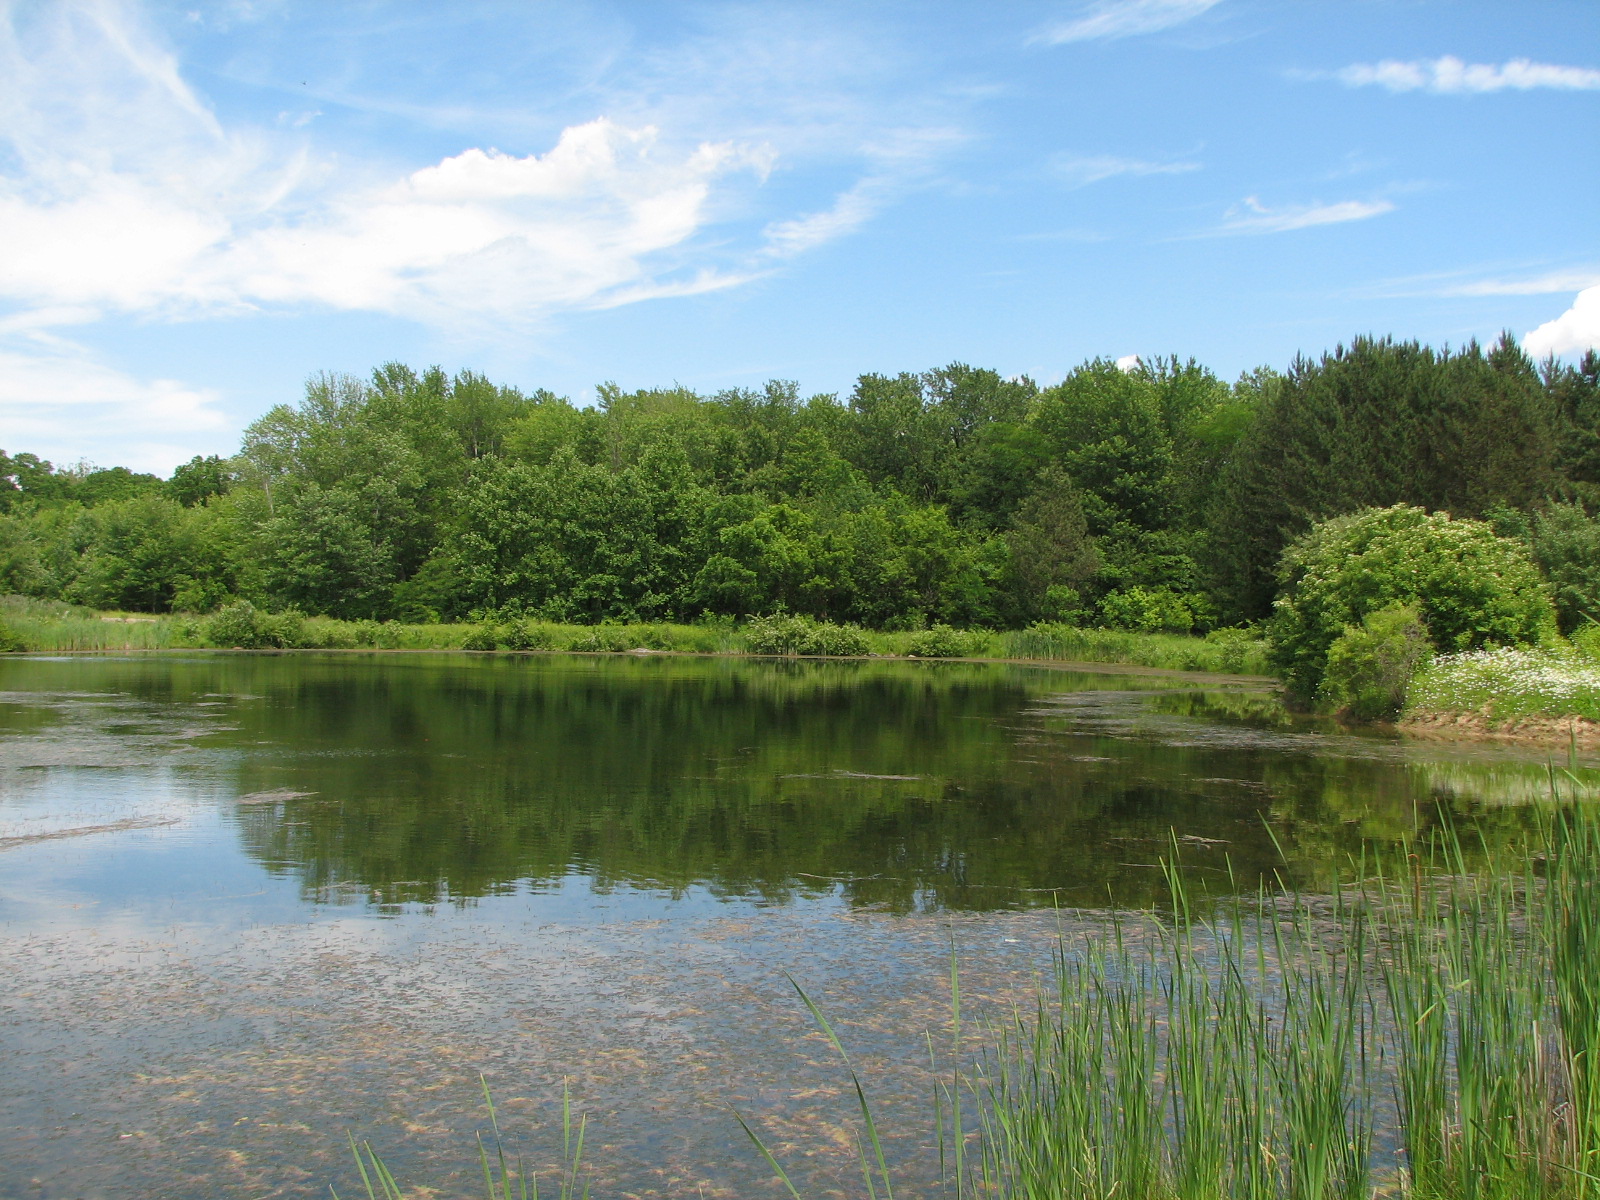 Caley Reservation's large pond/wetland